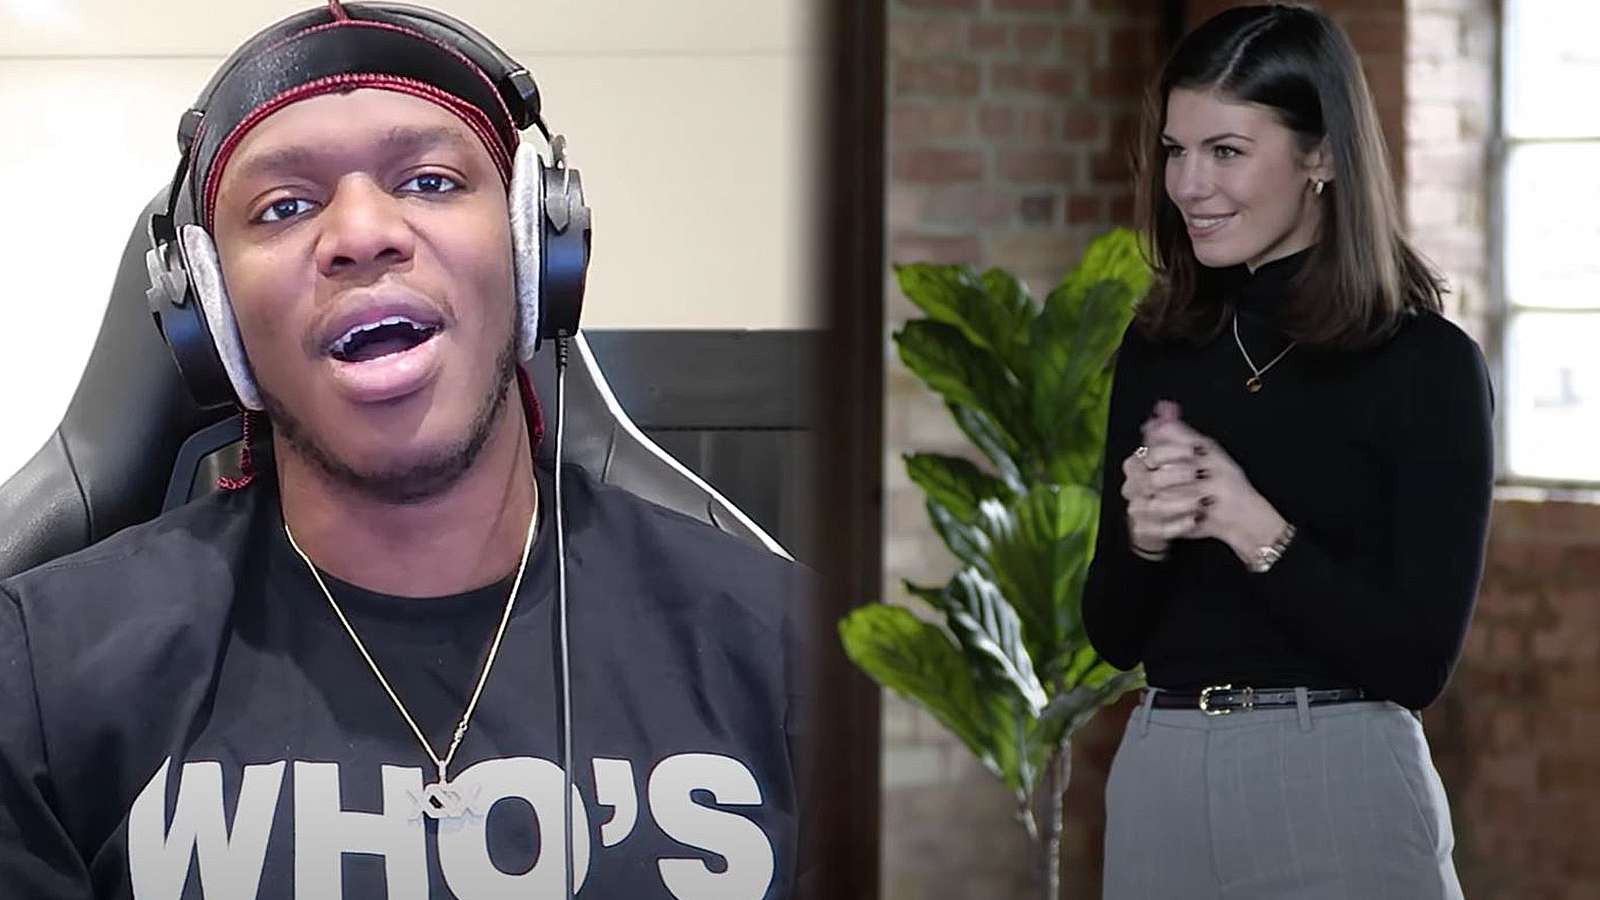 KSI asks fans to stop bullying tinder contestants